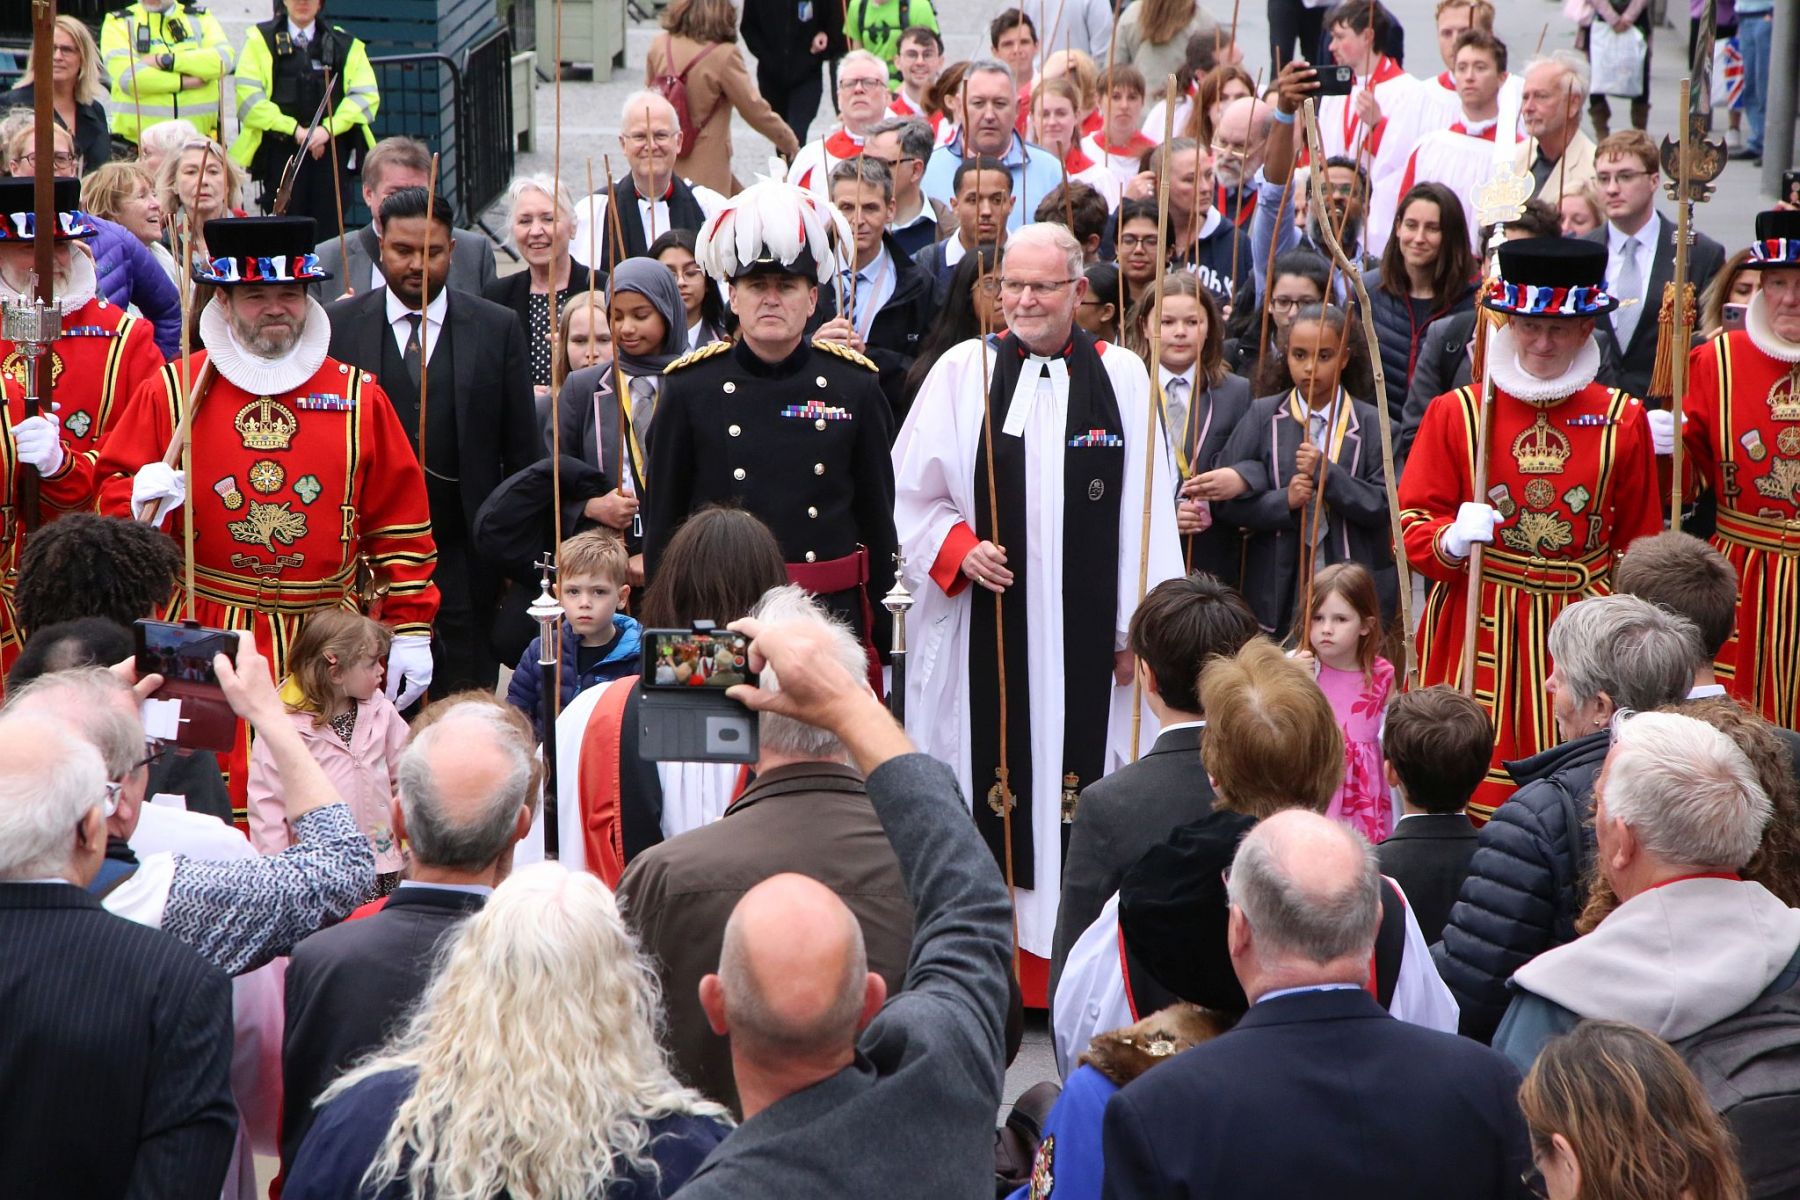 The triennial church battle on Ascension Day (26th May) between the Yeoman Warders (Beefeaters) of The Tower of London and the Clergy of All Hallows by the Tower. about the exact location of the parish (church) boundary.. Beating the Bounds.